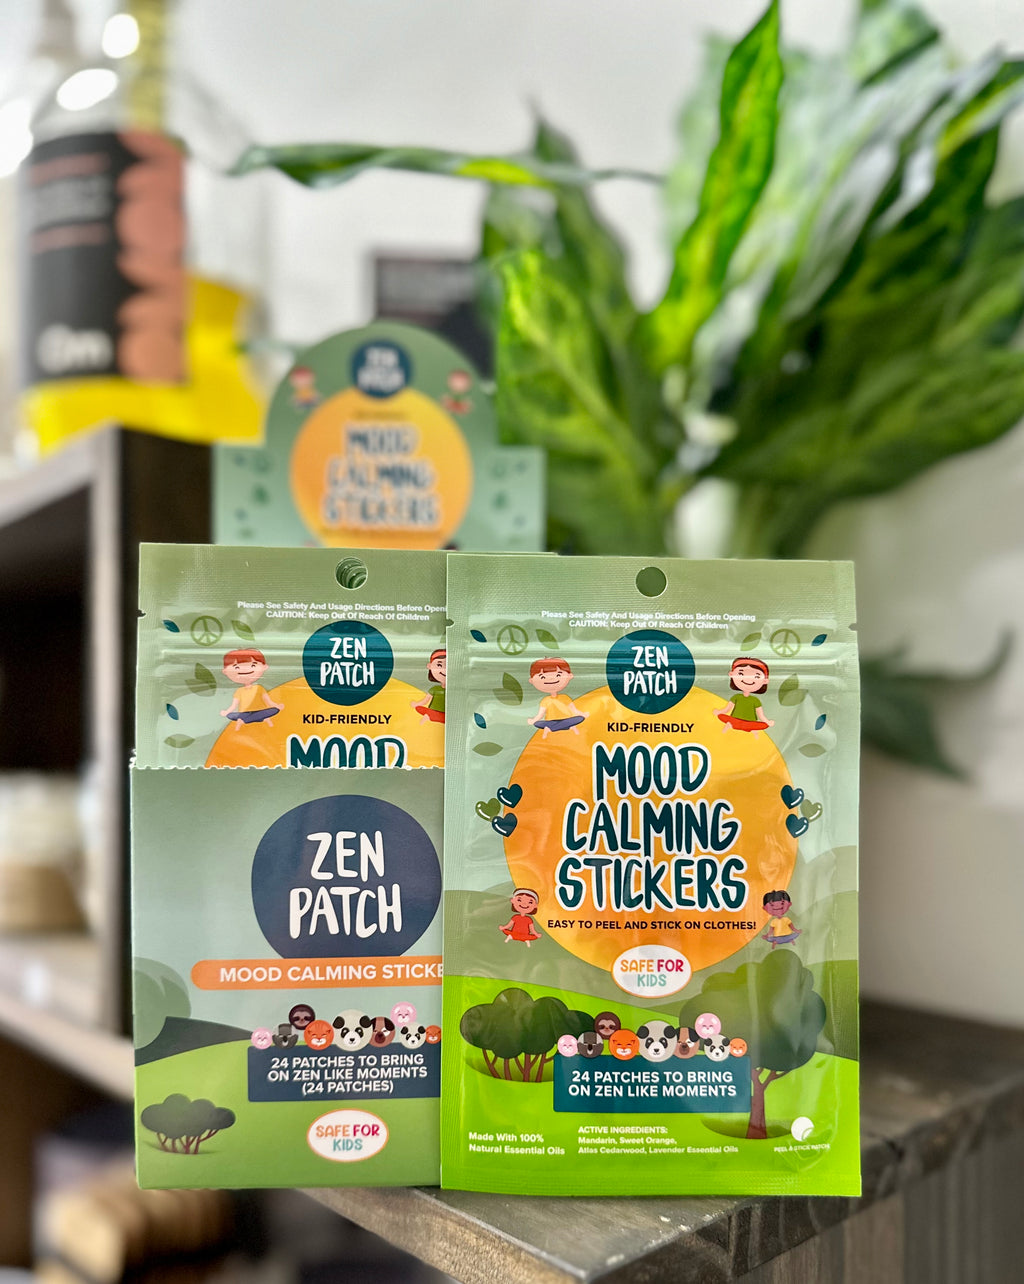 The Natural Patch- Zen Patch Mood Calming Stickers